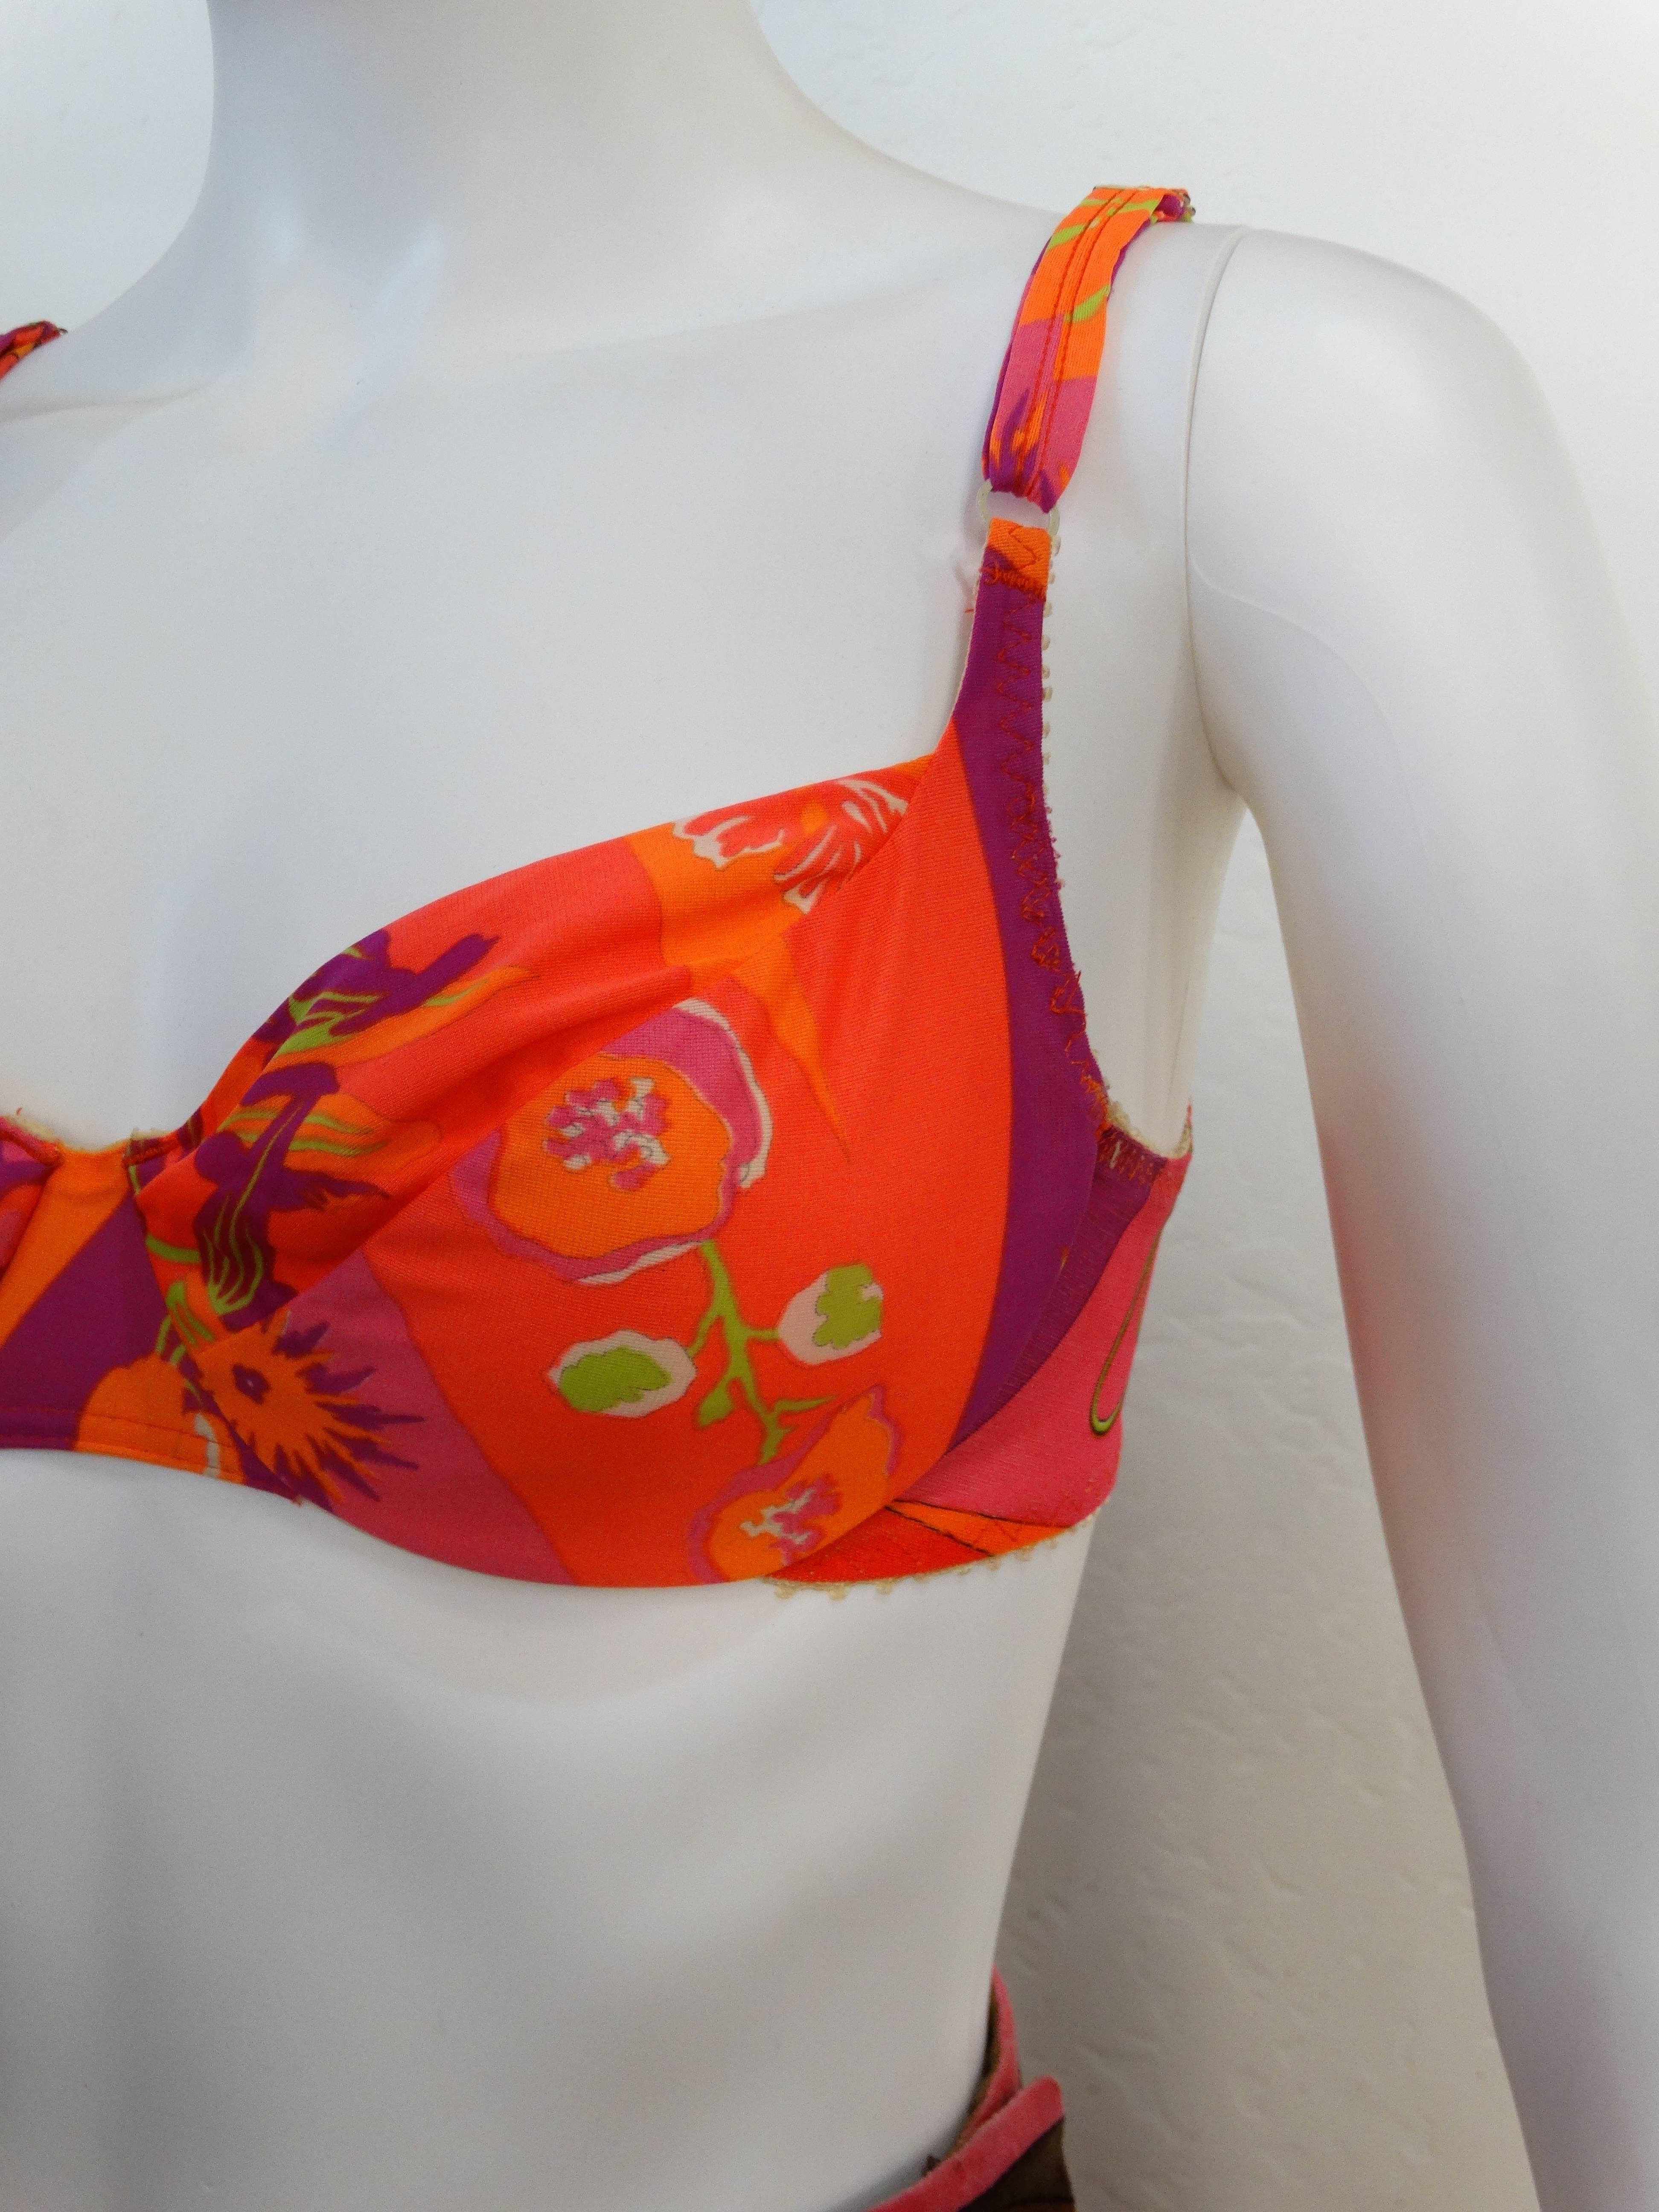 Red 1960s Emilio Pucci Neon Soft Bra for Formfit Rogers